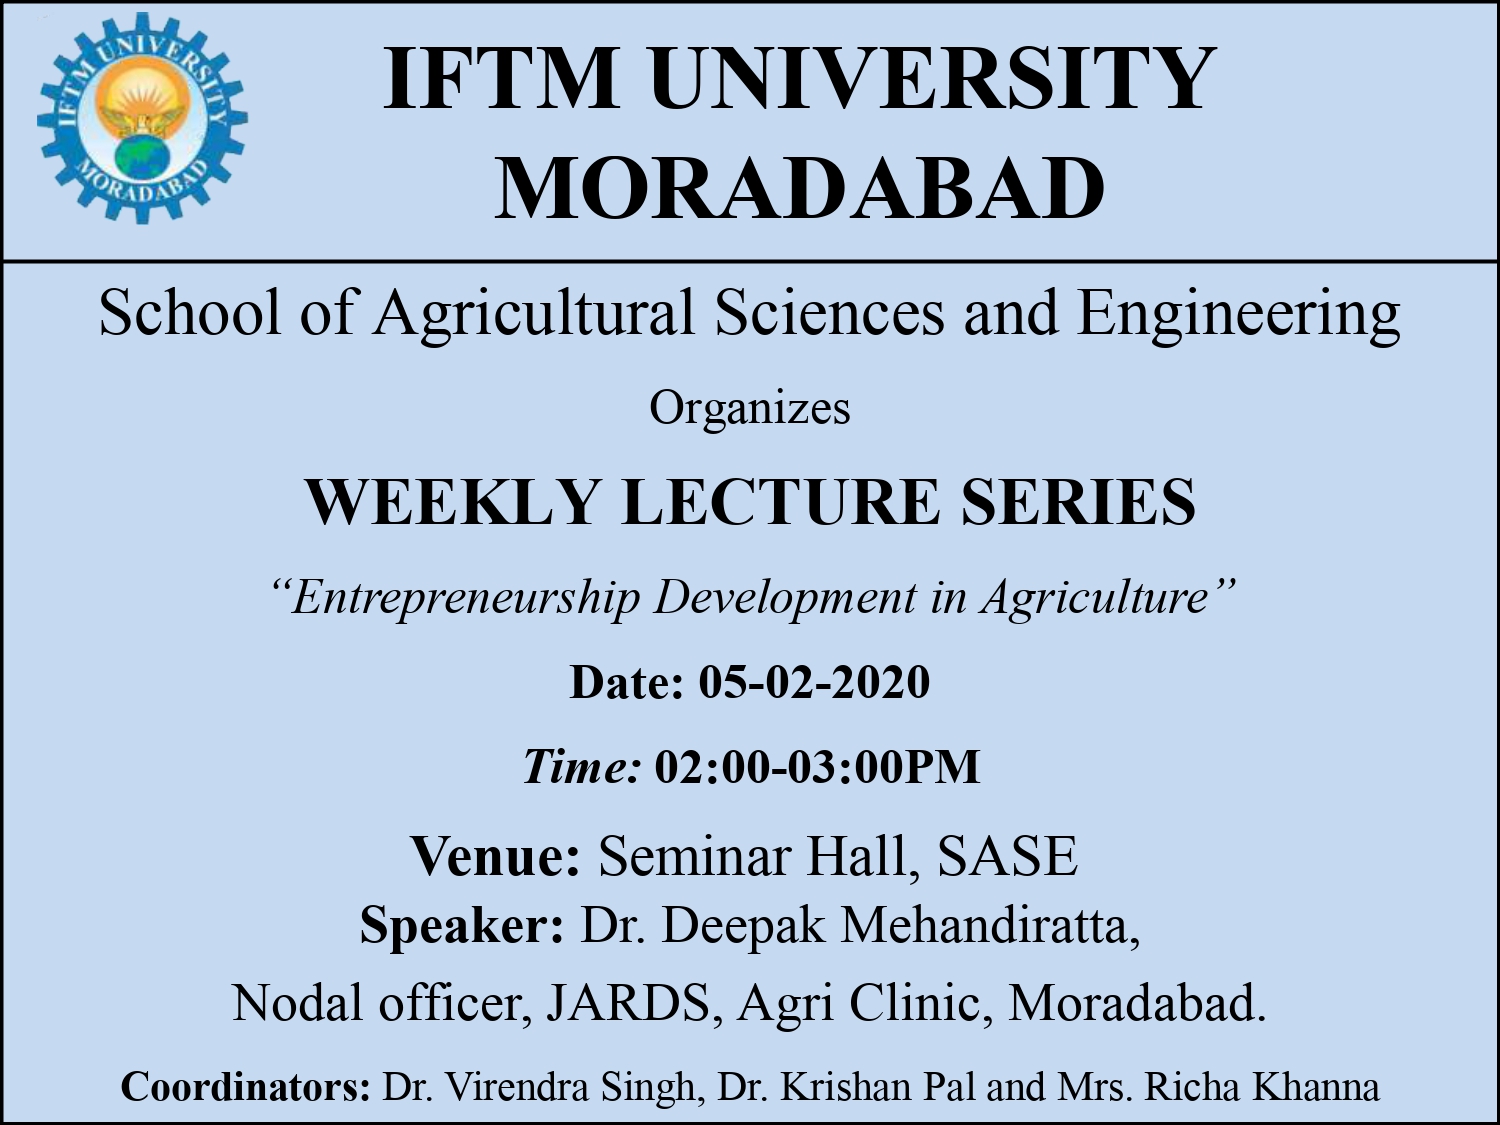 Weekly Lecture Series: “Entrepreneurship Development in Agriculture”